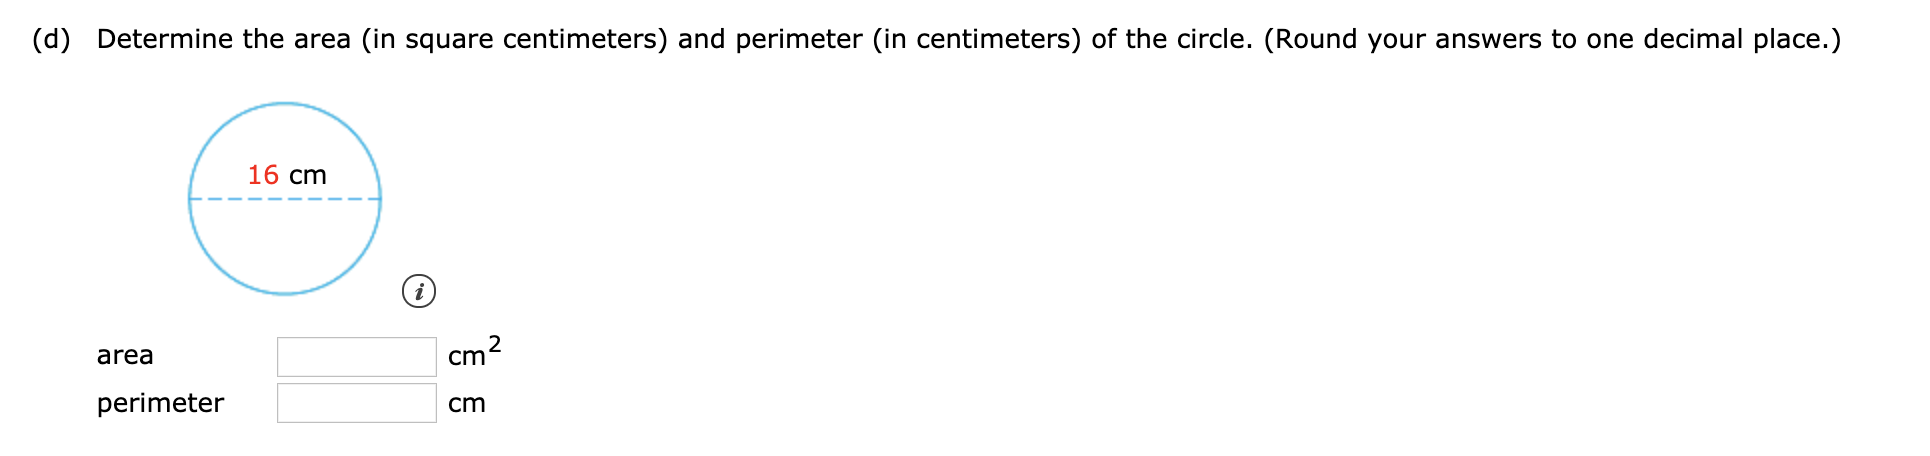 (d) Determine the area (in square centimeters) and perimeter (in centimeters) of the circle. (Round your answers to one decimal place.)
16 cm
area
cm
perimeter
cm
